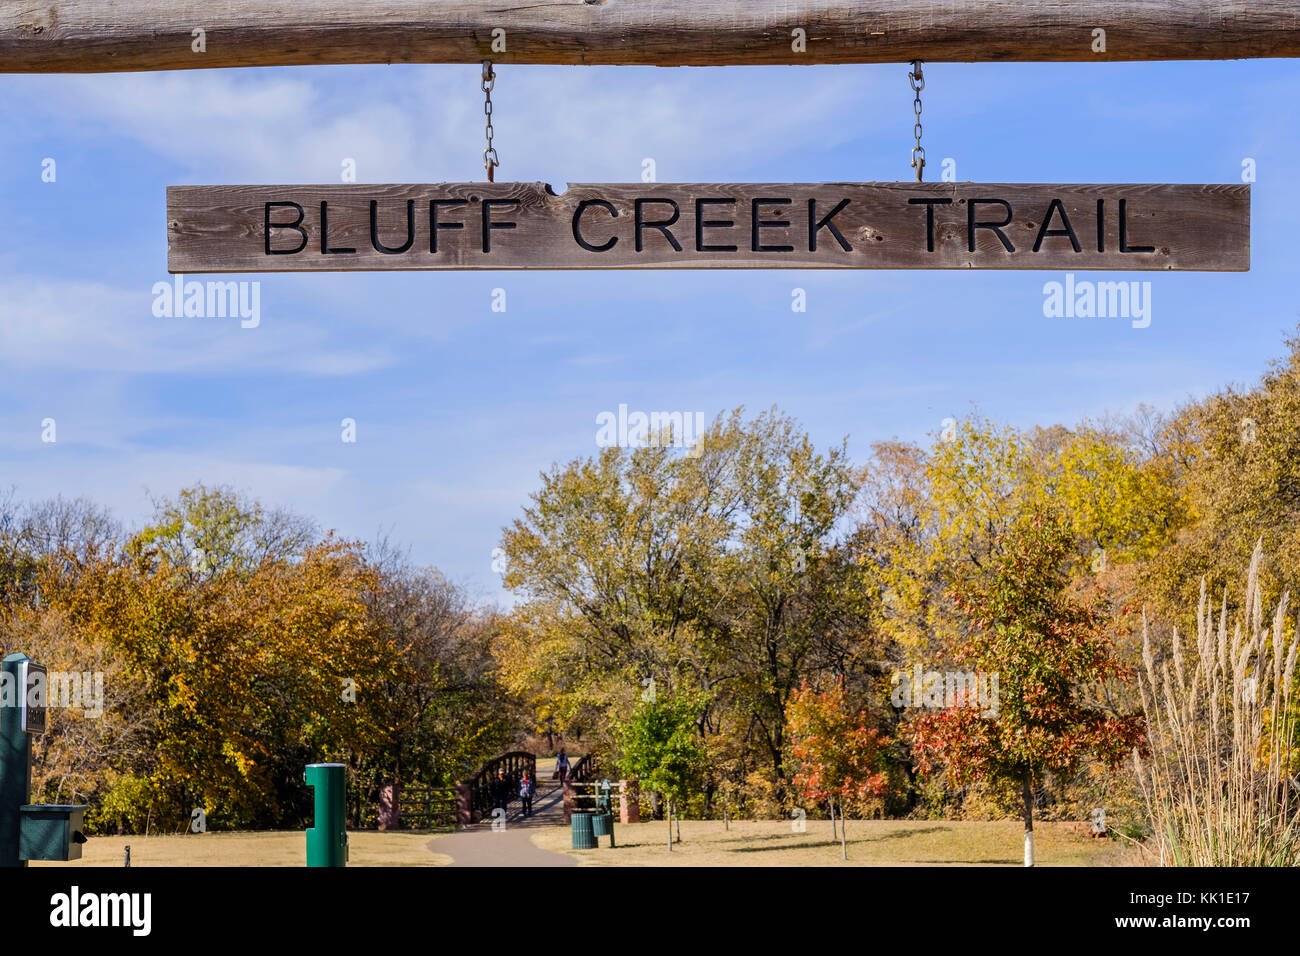 The entrance and wooden sign to Bluff Creek trails in Bluff Creek park and walking biking paths. Oklahoma City, Oklahoma, USA. Stock Photo